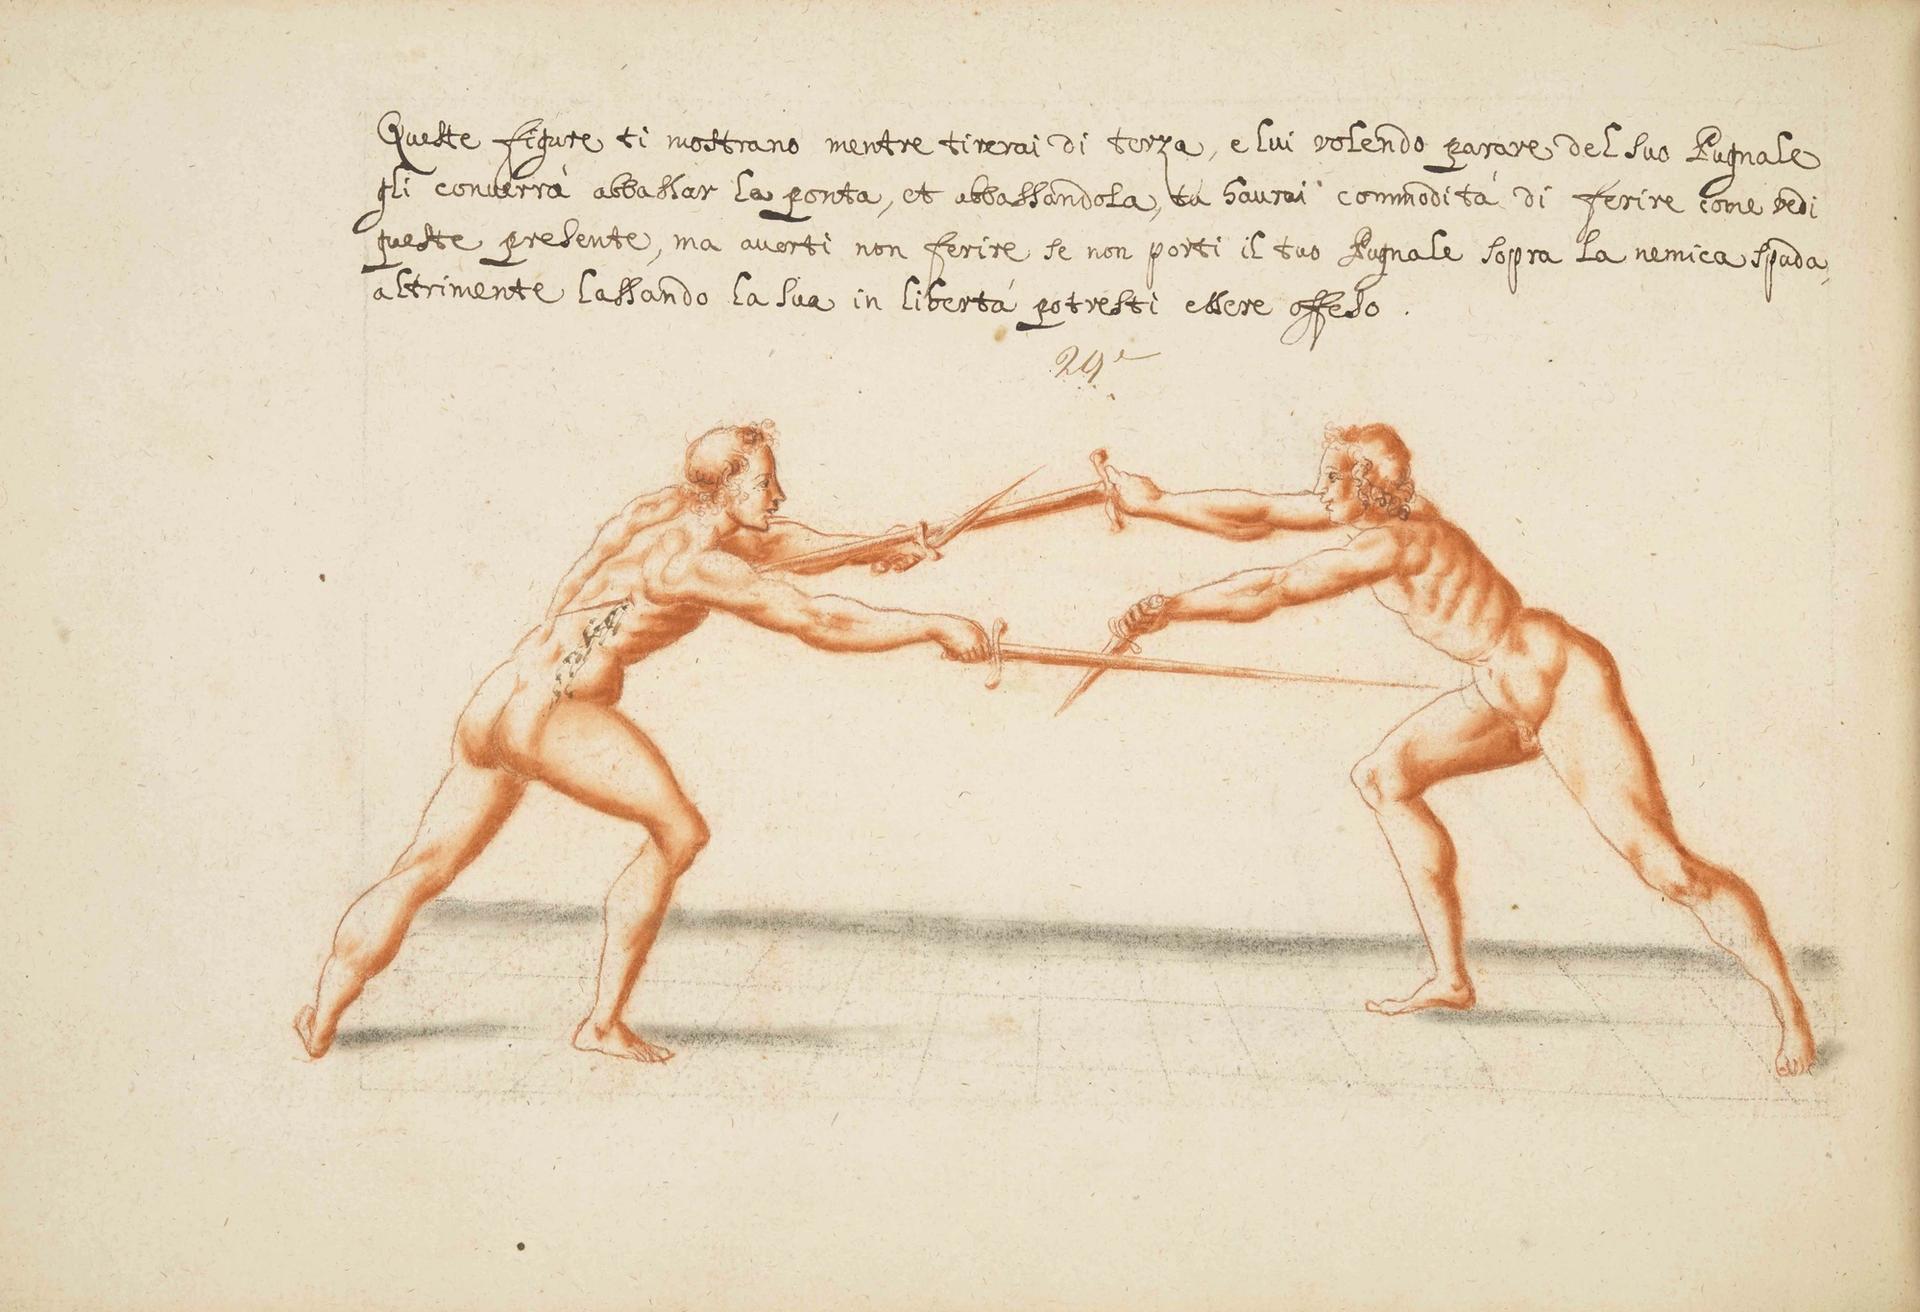 “These two figures demonstrate that when thrusting in terza…[to] take care not to attack him if you cannot put your dagger over his sword, since by leaving his sword free you risk being struck” Credit: The Wallace Collection